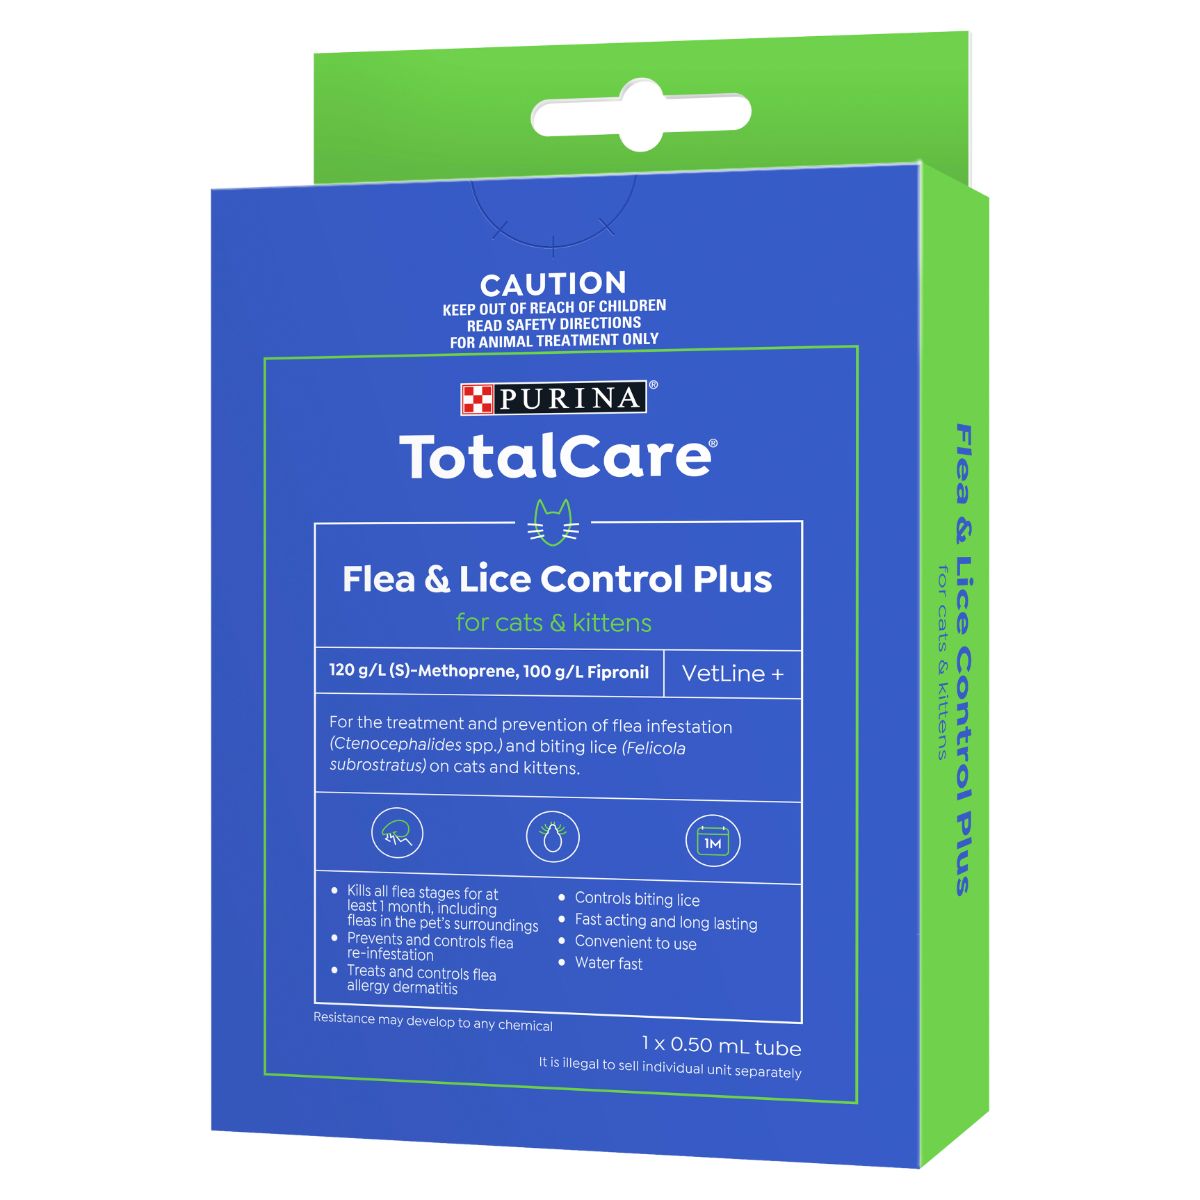 Purina Total Care Flea & Lice Control Plus for Cats & Kittens